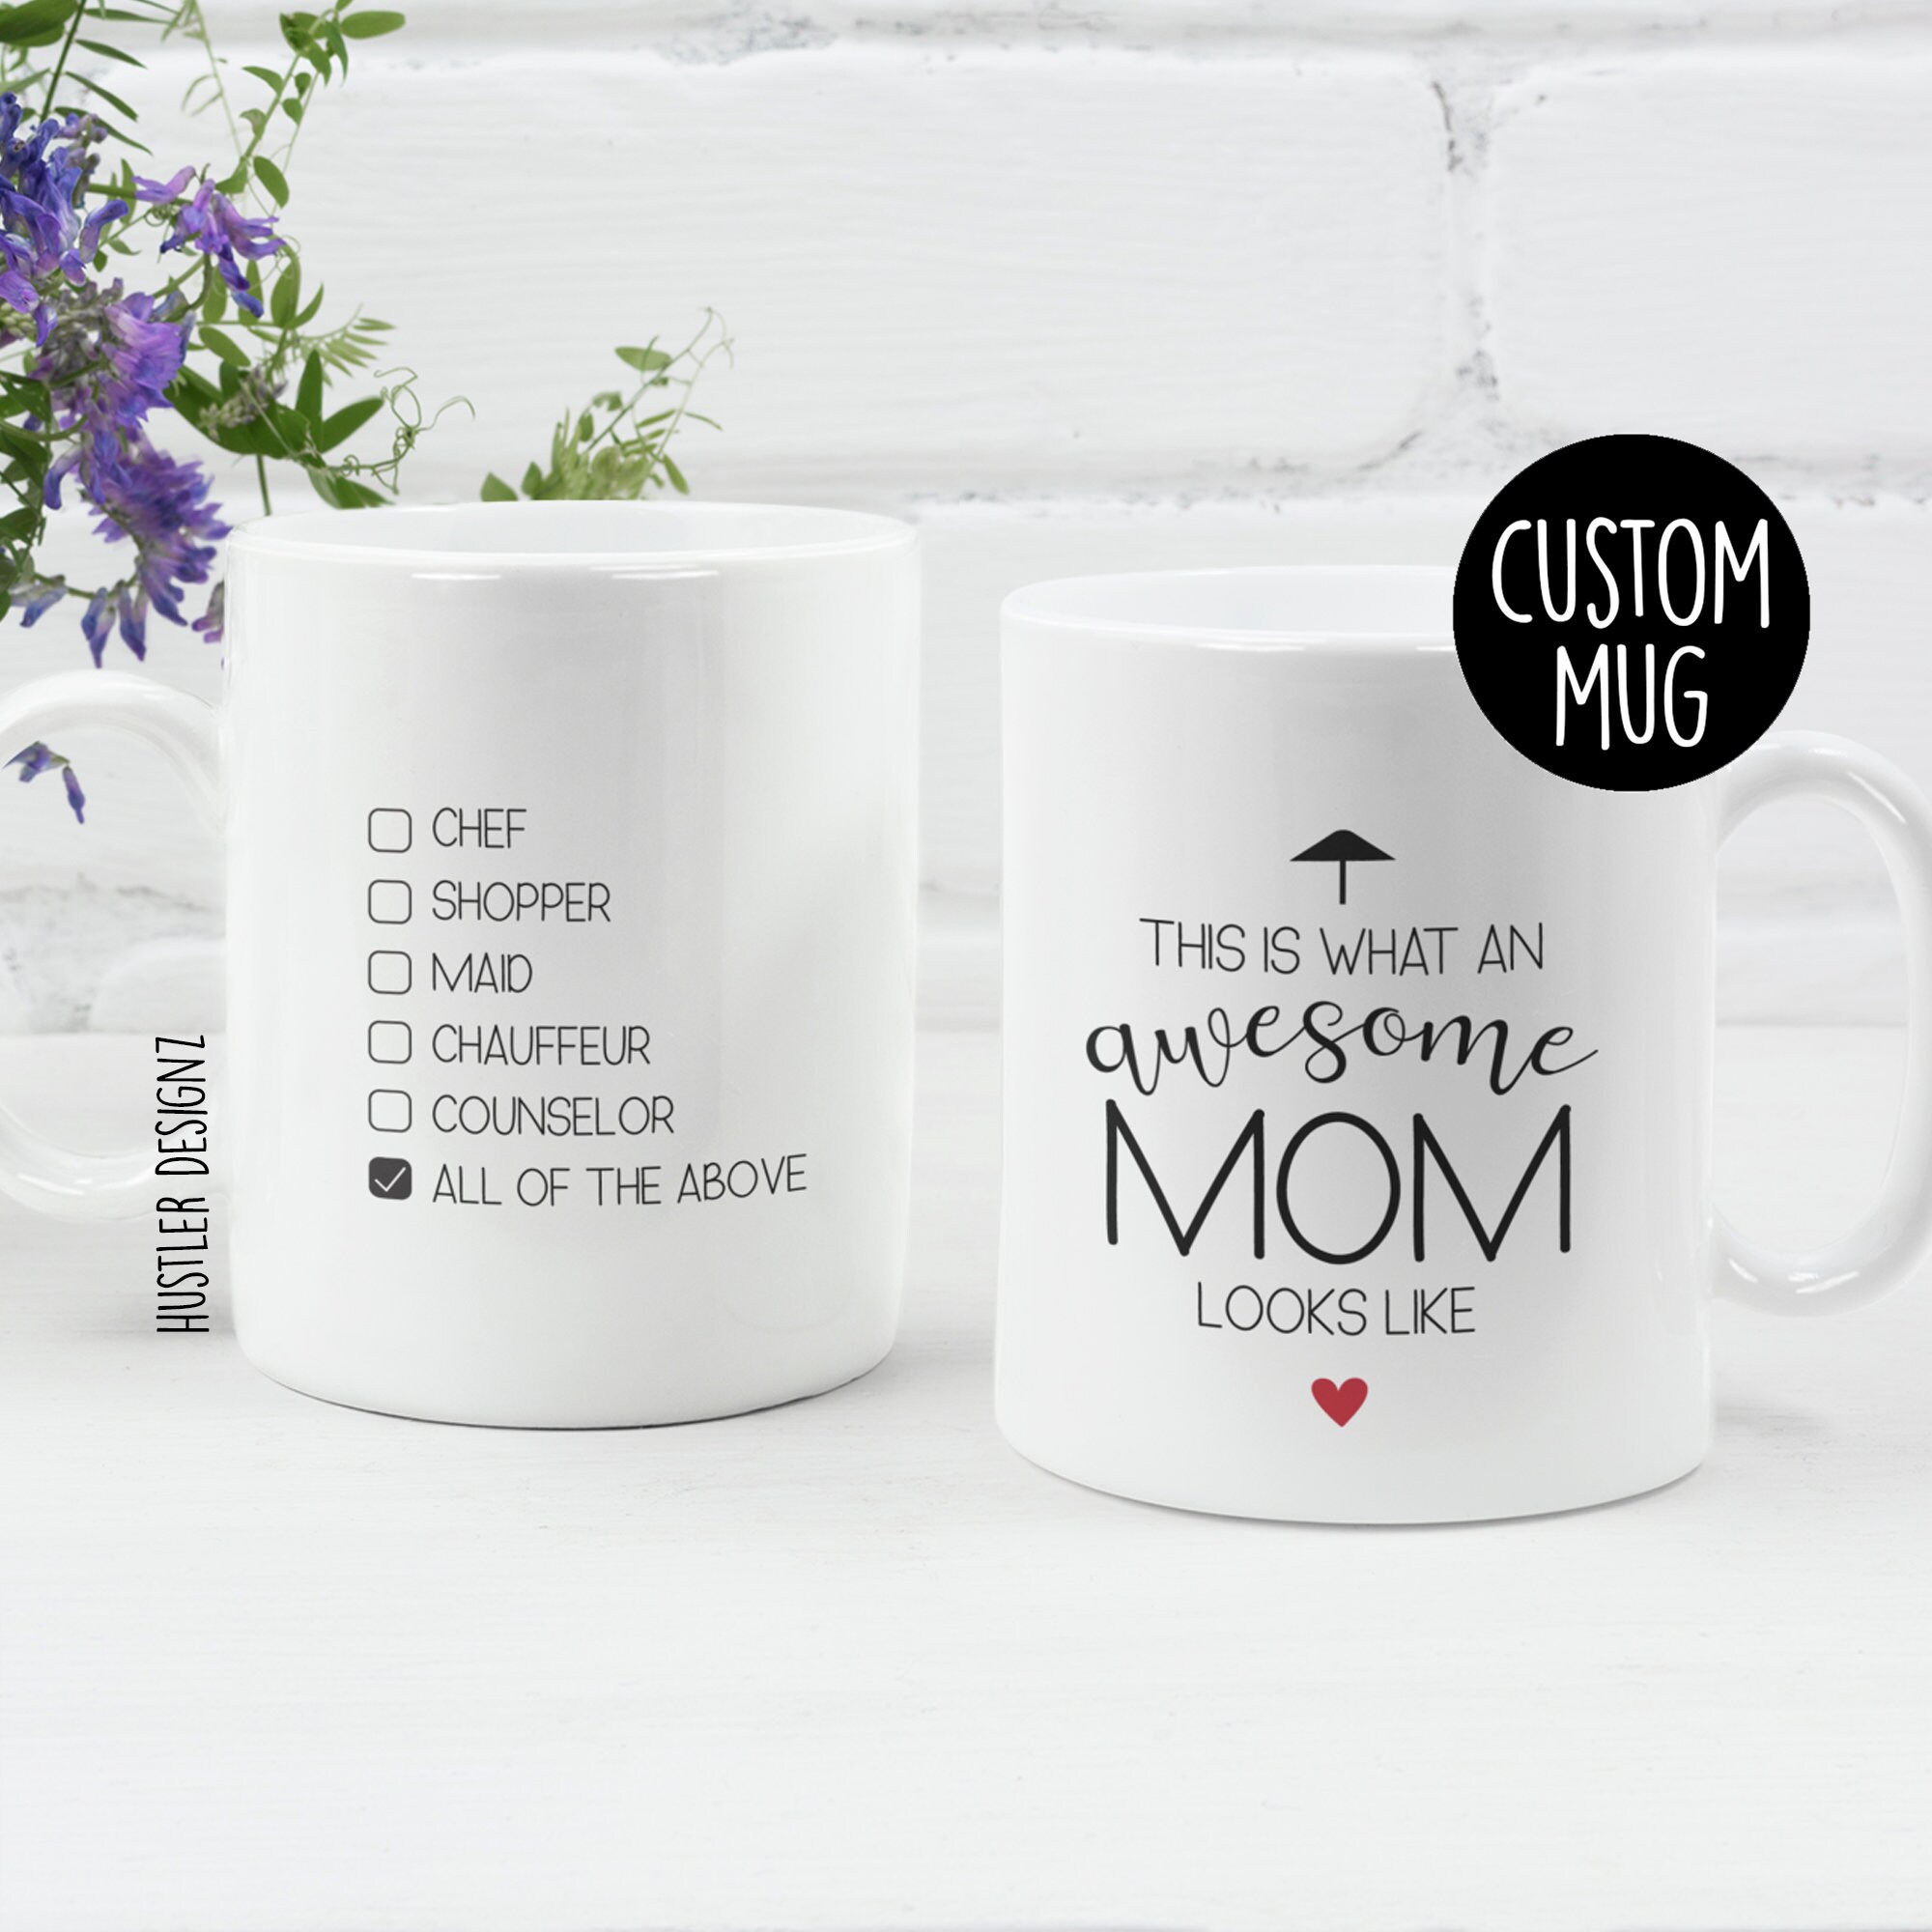 Mom Mamasaurus more awesome Funny Personalized Mug - Vista Stars -  Personalized gifts for the loved ones